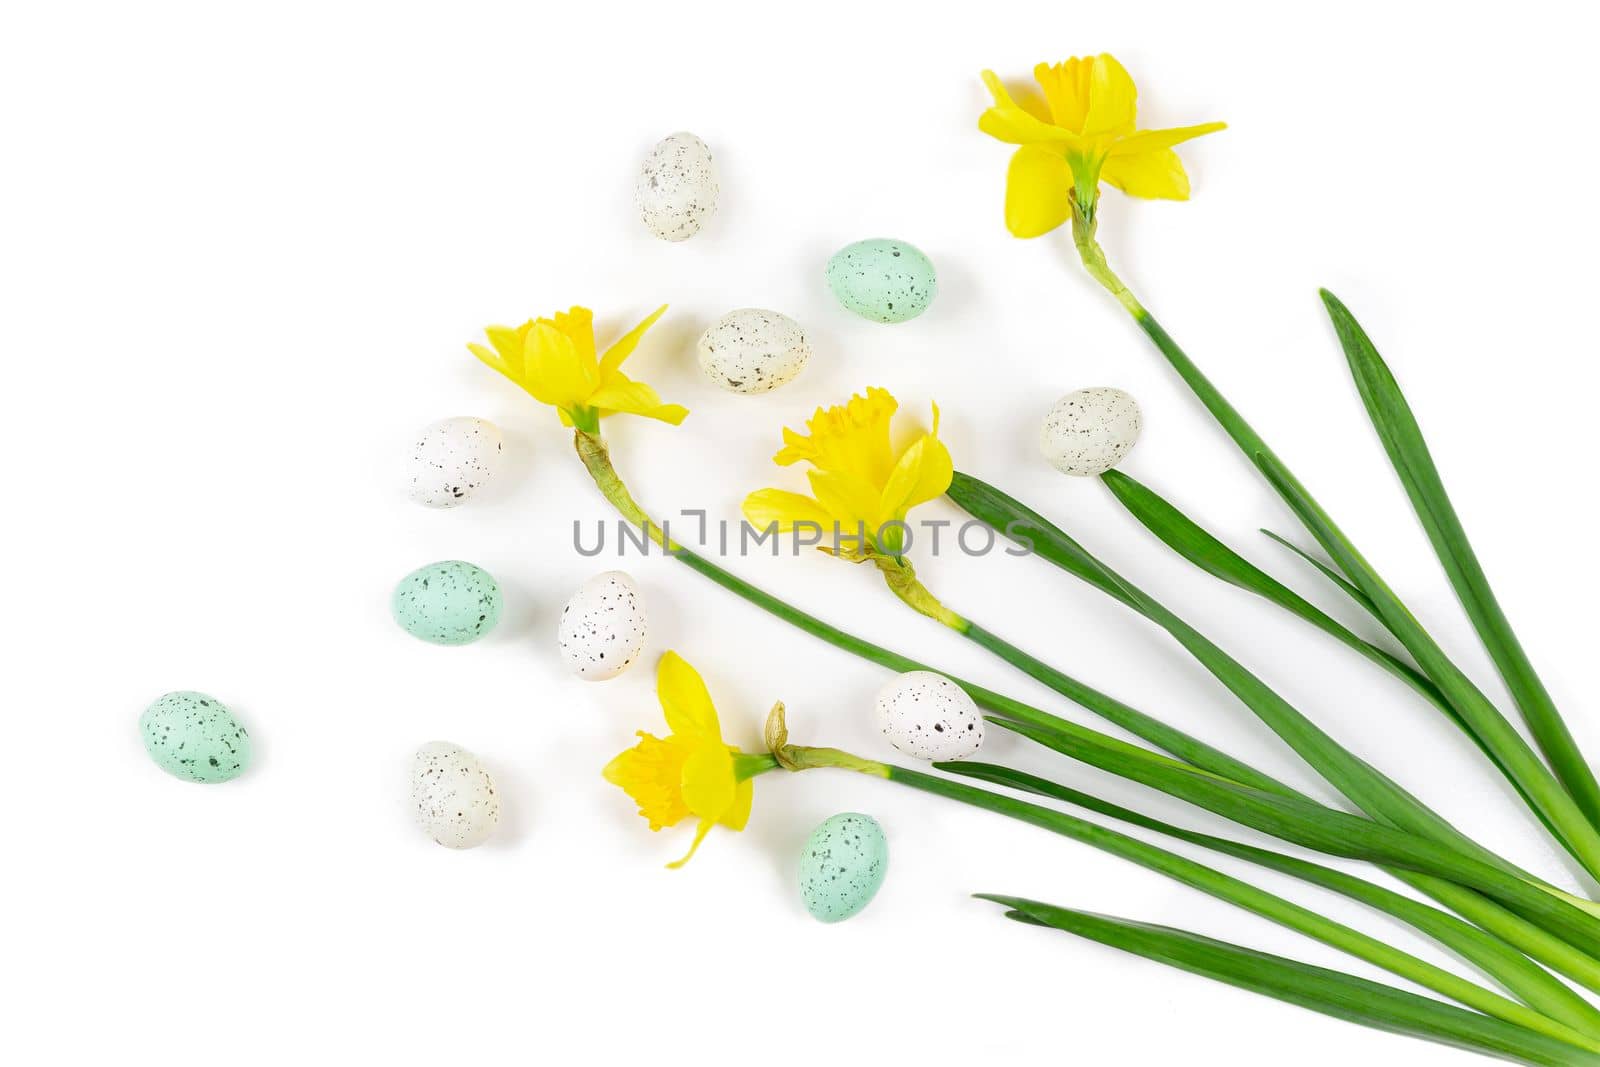 Flowers seen from above with green and white eggs wit narcissus